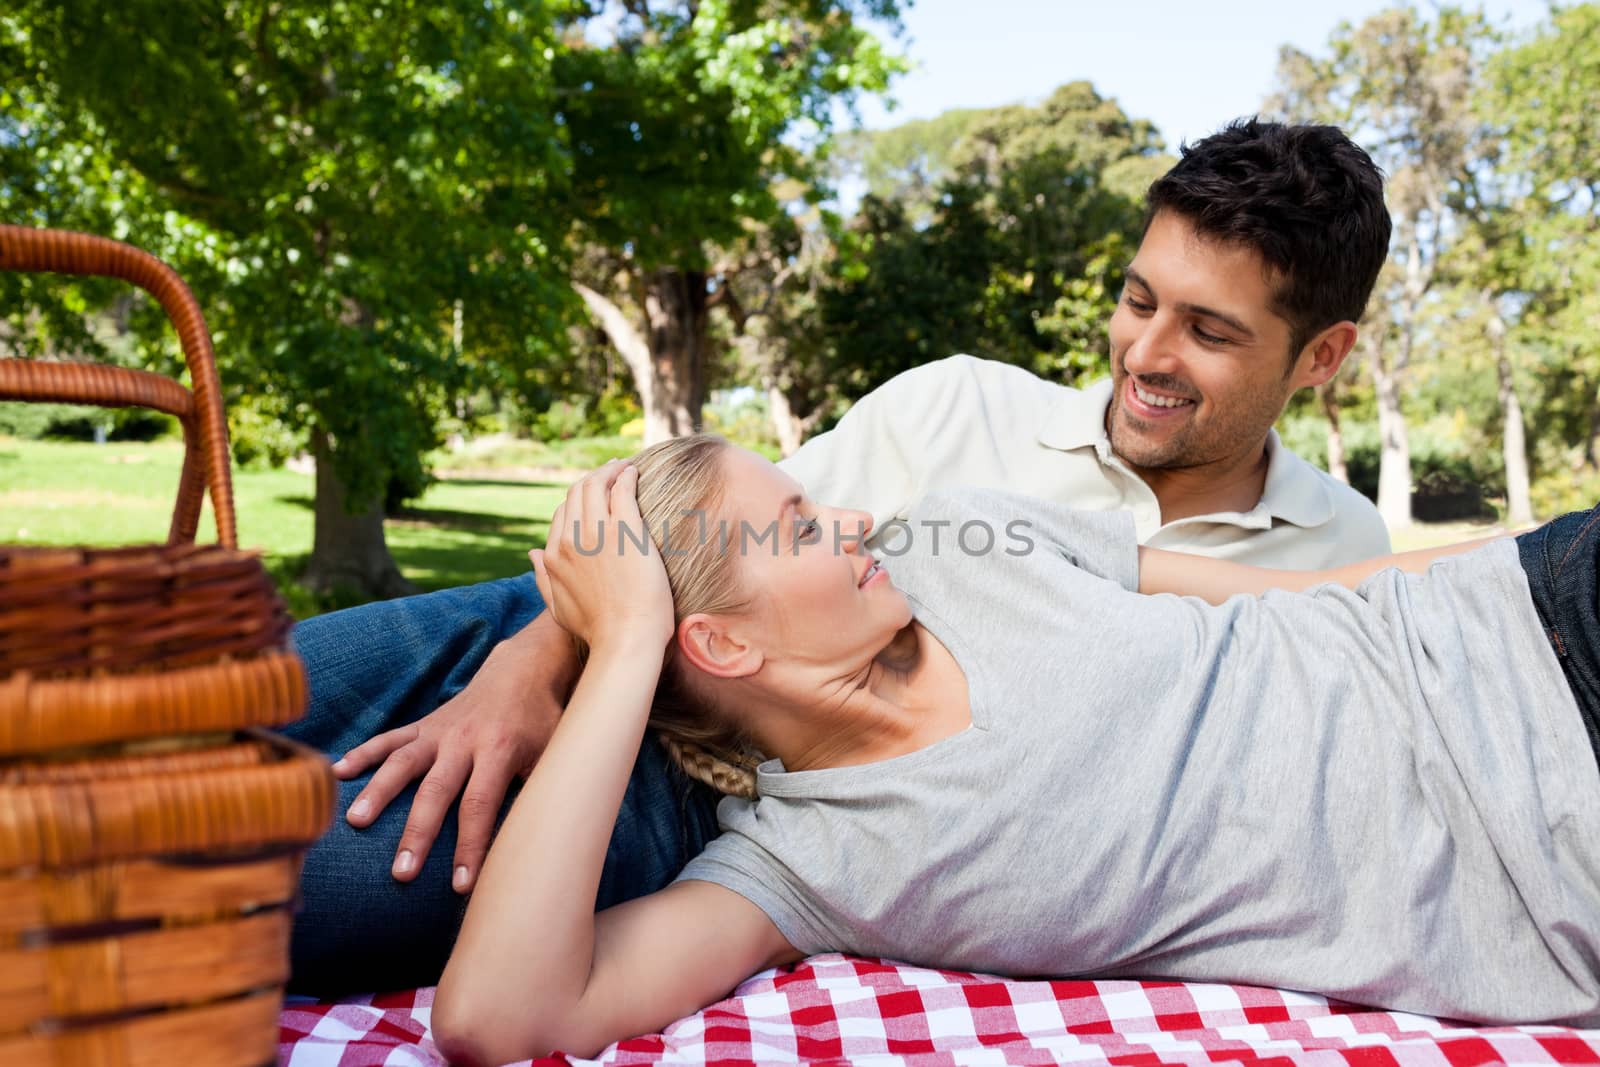 Couple picnicking in the park by Wavebreakmedia